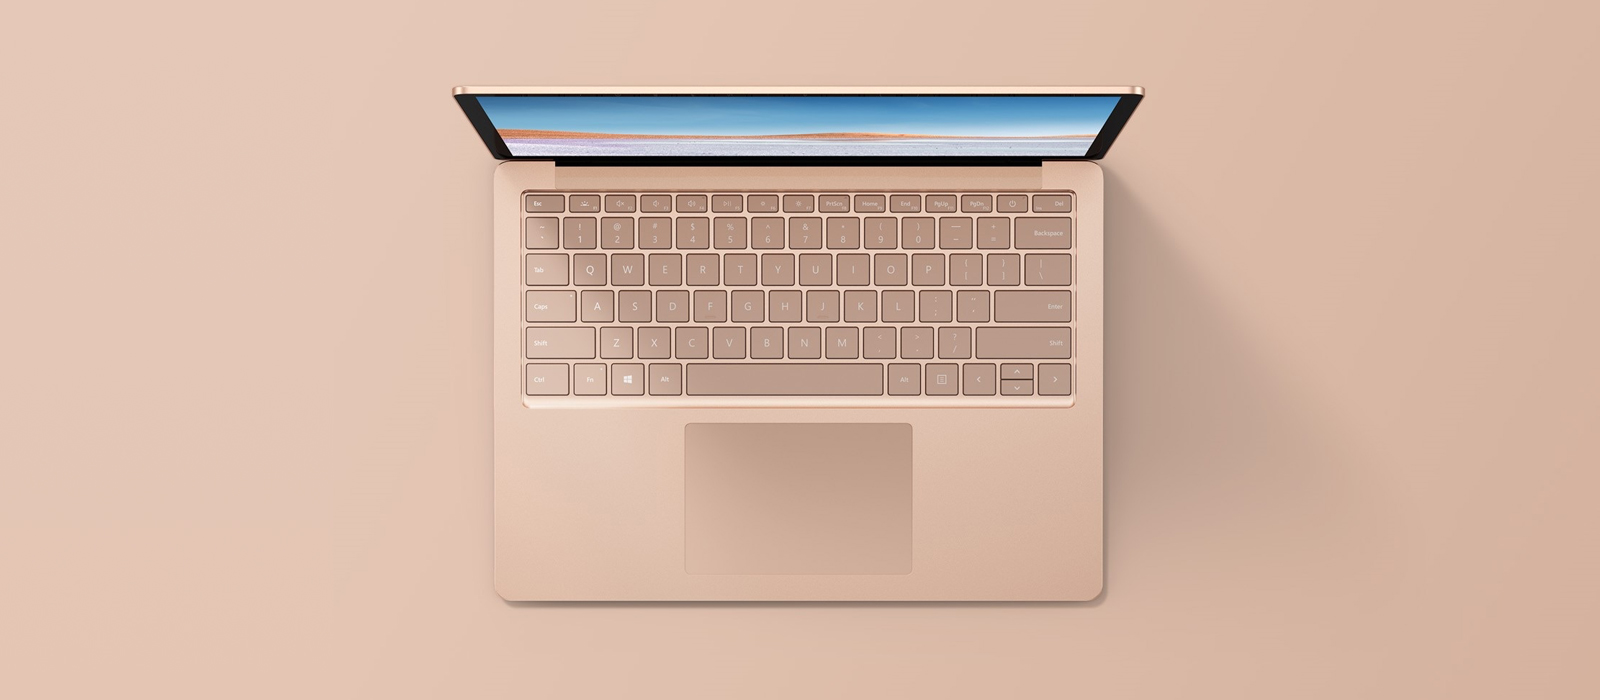 A Surface Laptop with Sandstone finish from a bird's eye view